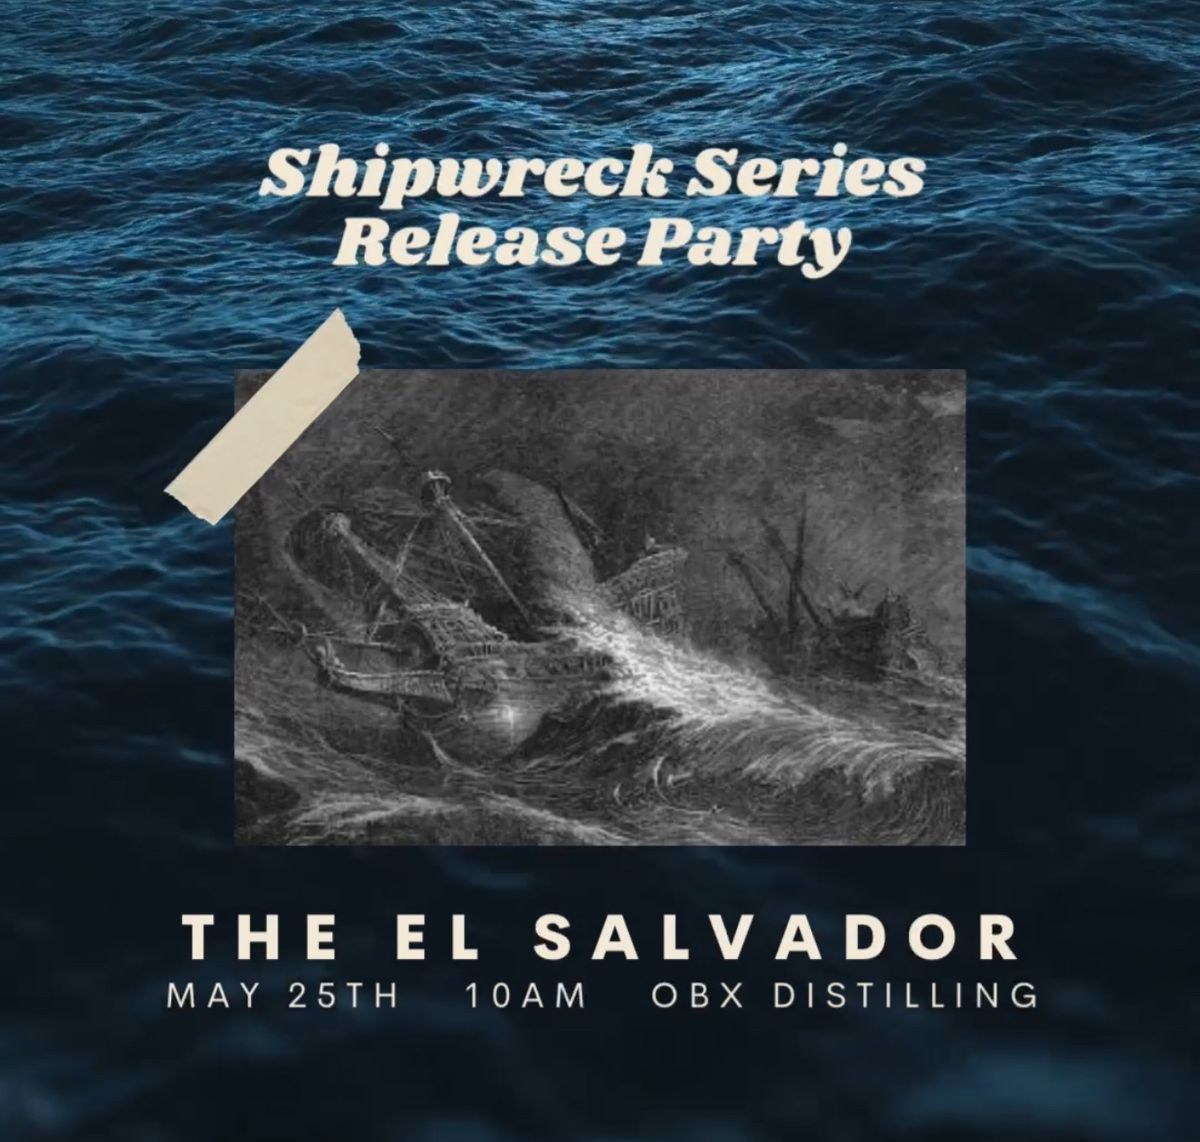 Shipwreck Series Release Party